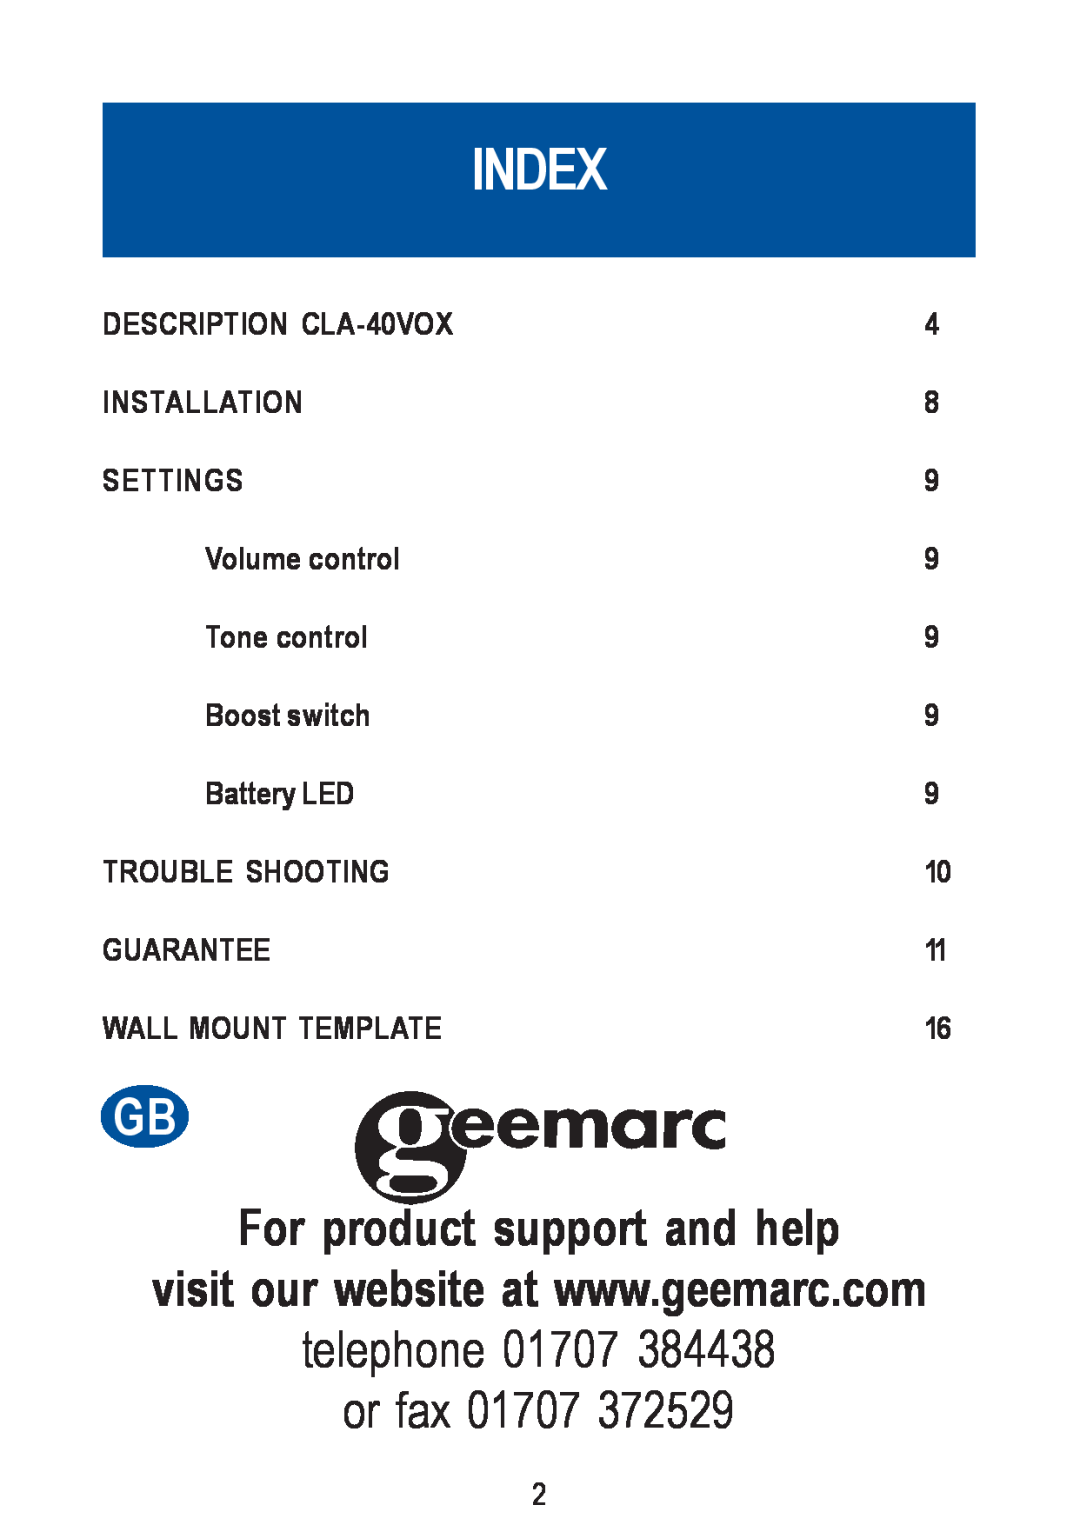 Geemarc CLA-40 VOX manual Index, For product support and help, telephone 01707 or fax 